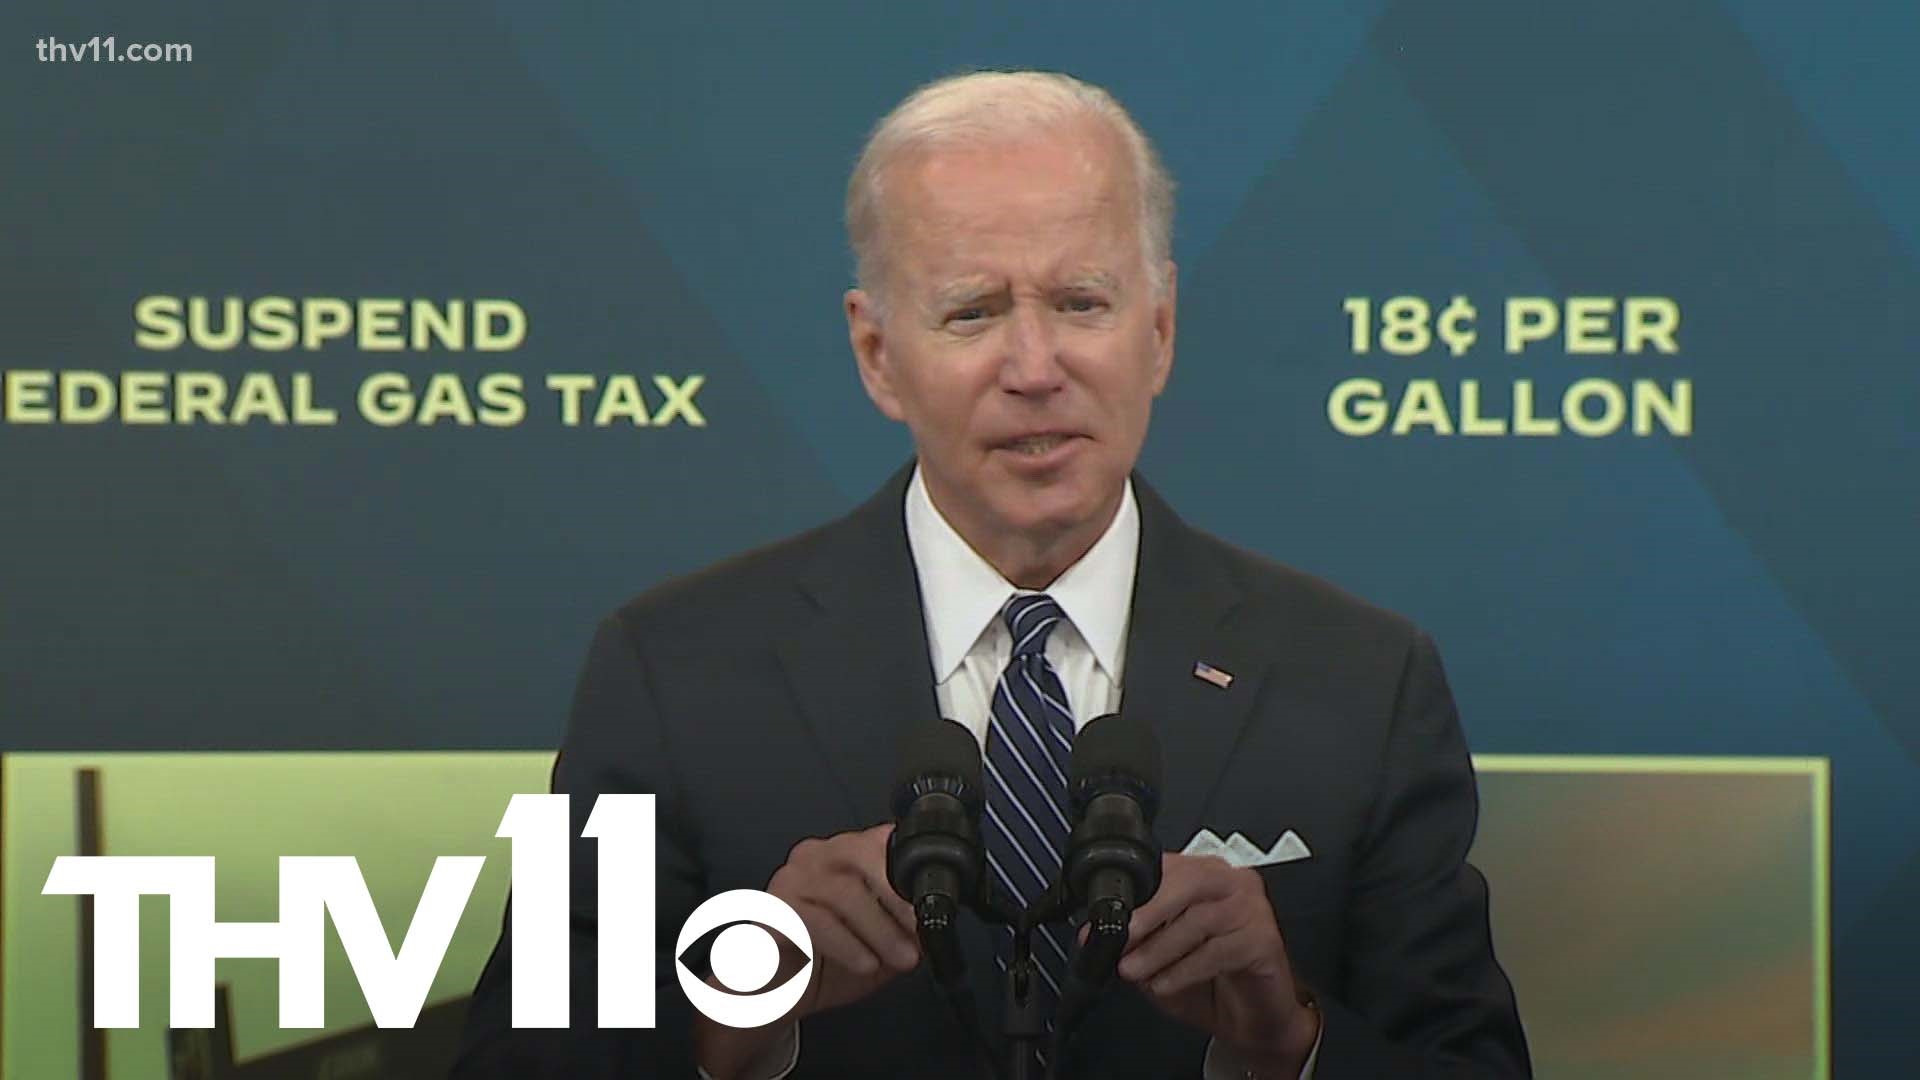 President Joe Biden on Wednesday called on Congress to suspend federal gasoline and diesel taxes for three months.